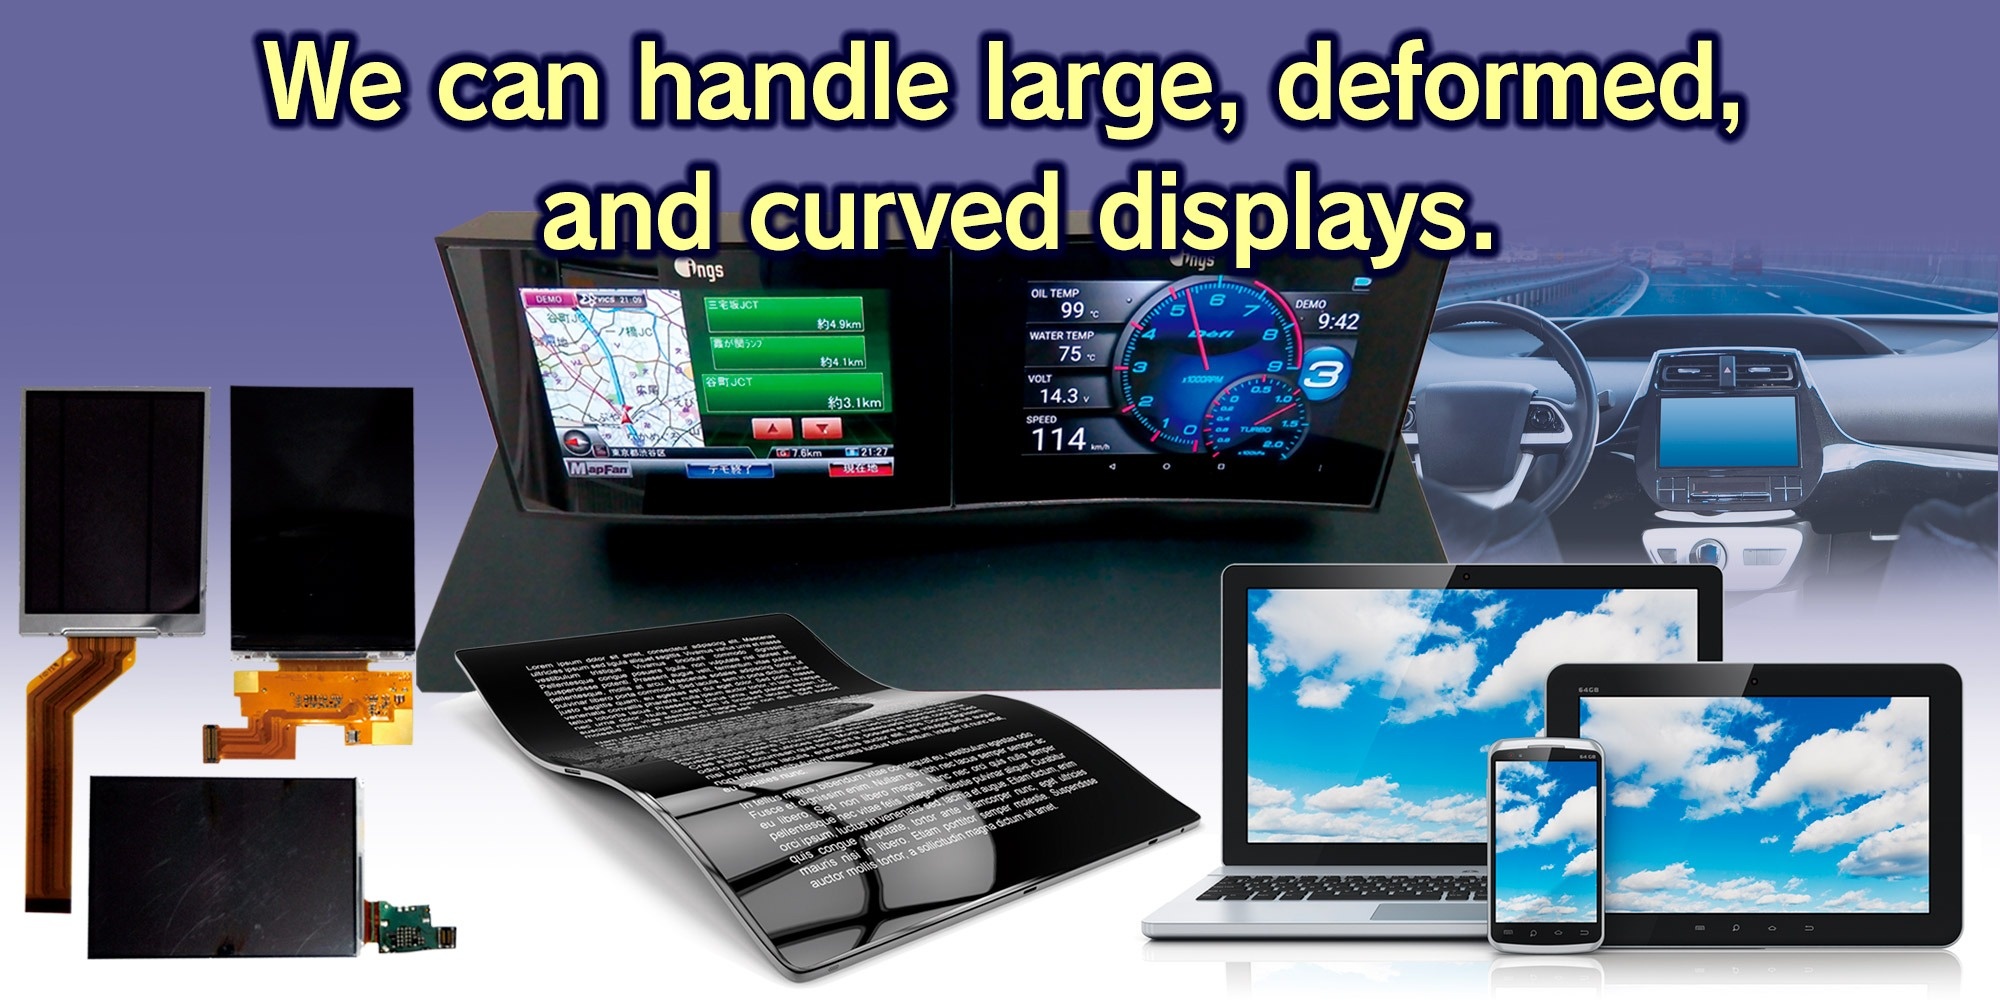 We can handle large, deformed, and curved displays.